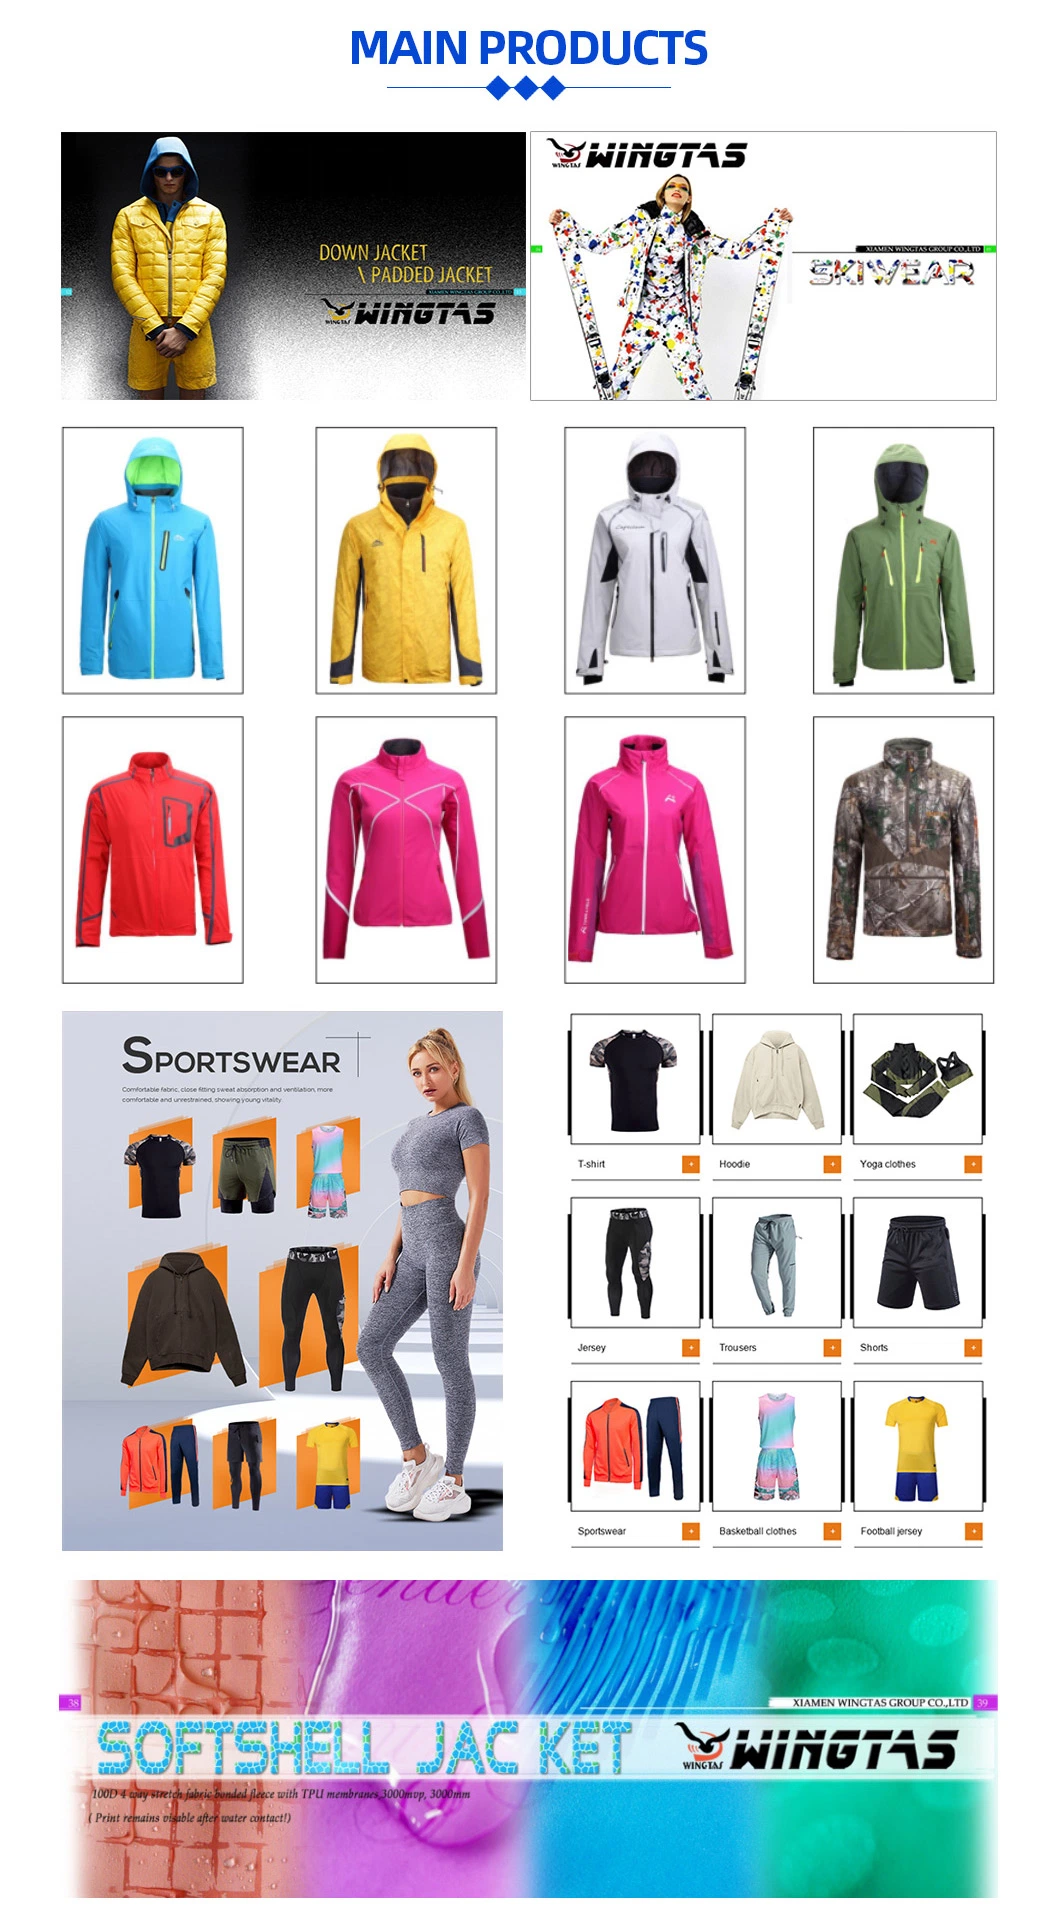 Basic Customization Fashion Winter Coat Puffer Bomber Jacket Clothes Down Apparel Outerwear